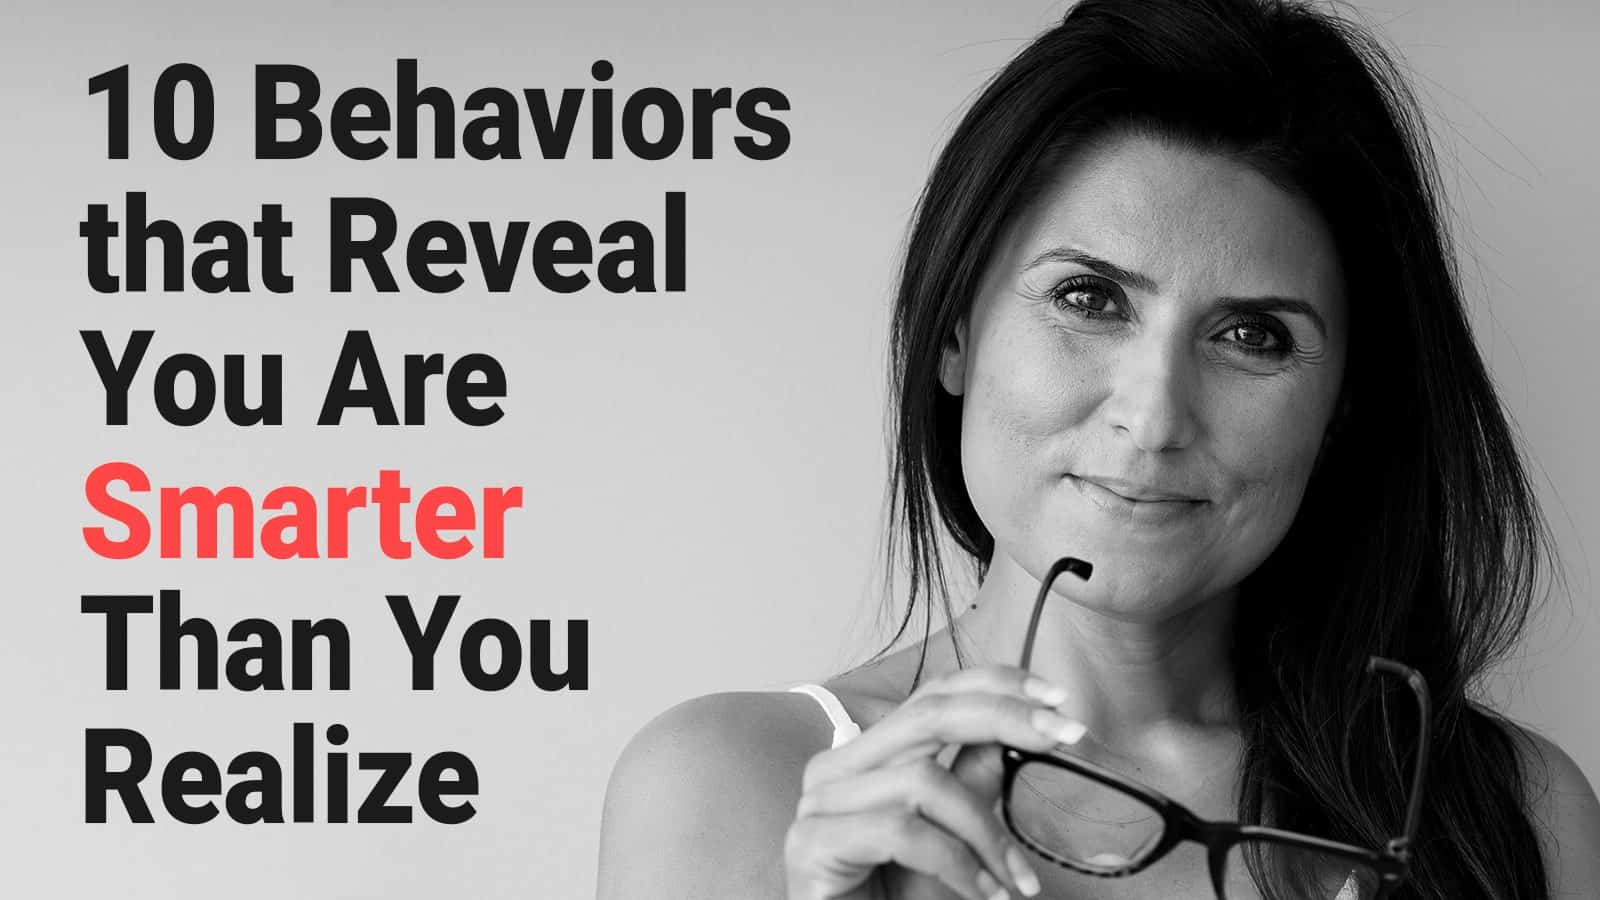 10 Behaviors That Reveal You Are Smarter Than You Realize